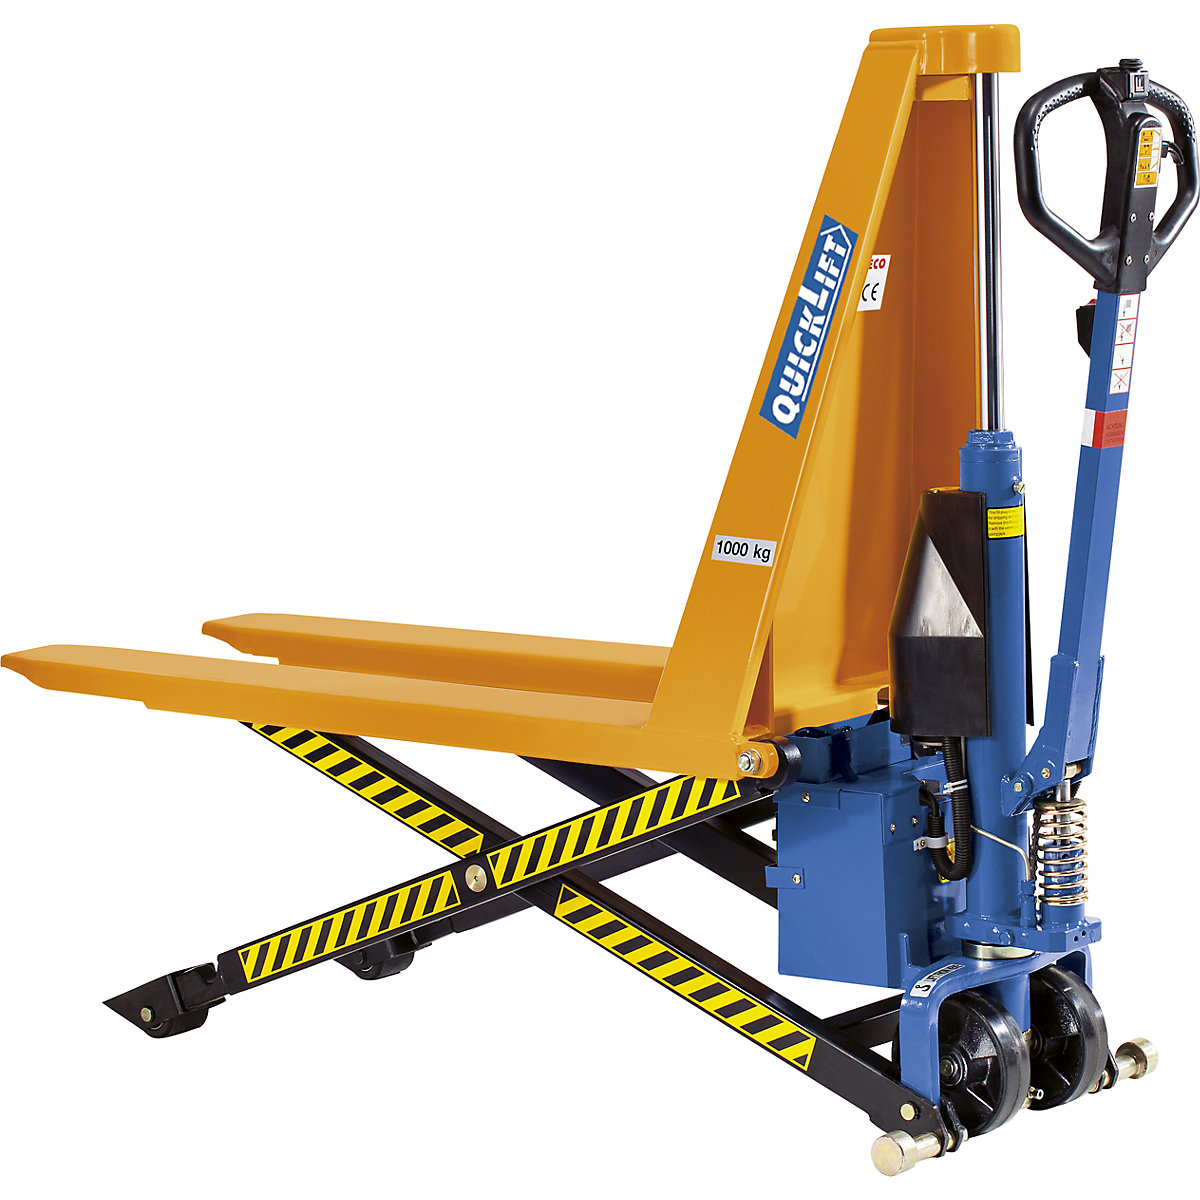 High-lift pallet truck, electric, max. load 1000 kg